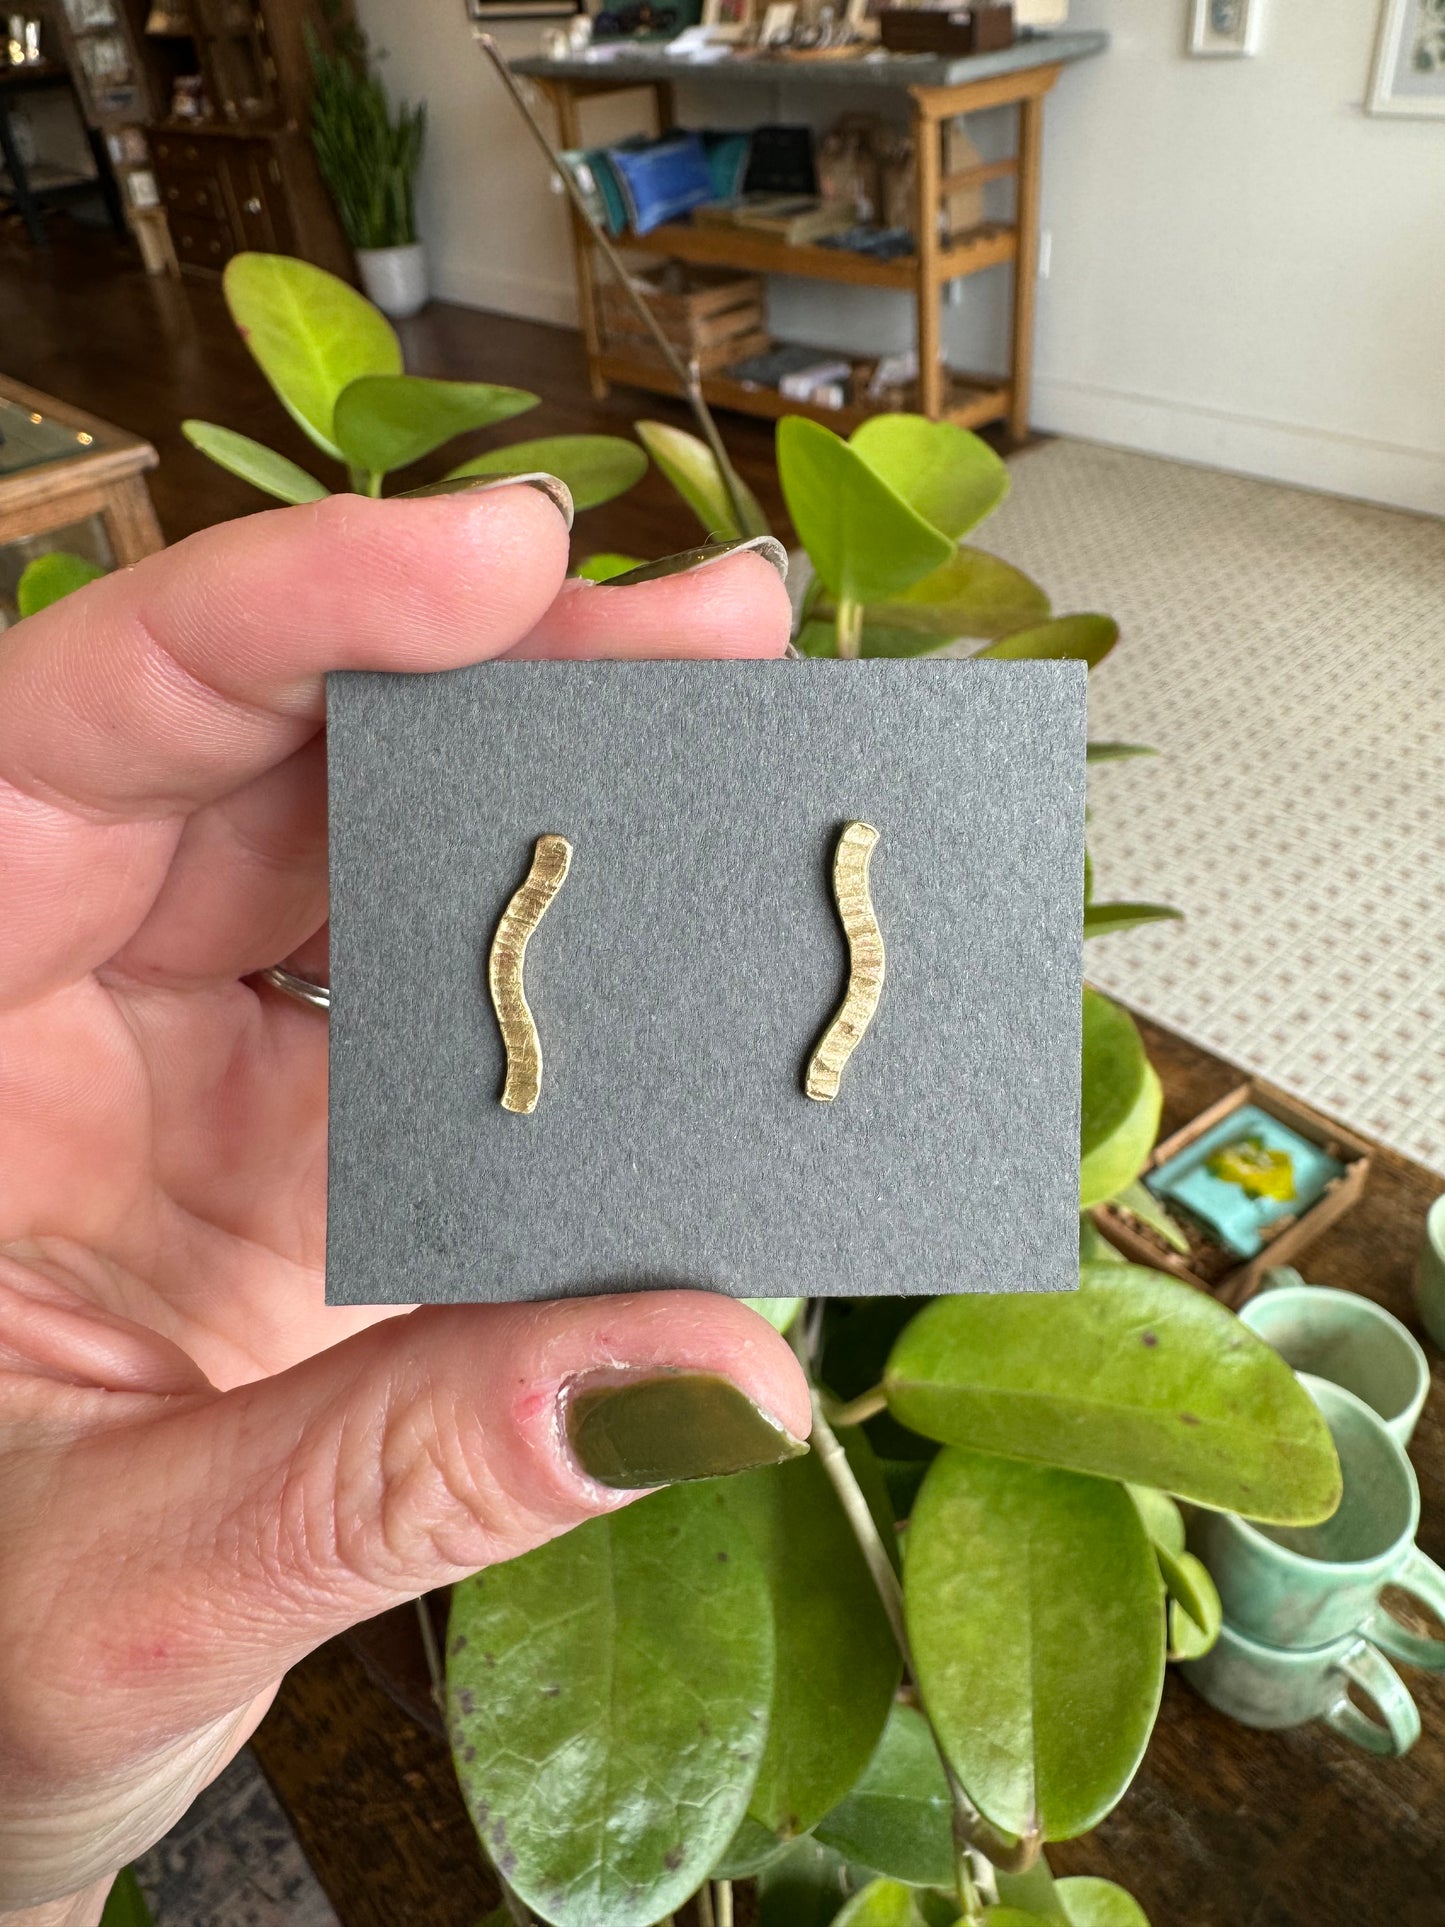 Brass Squiggle Post Earrings